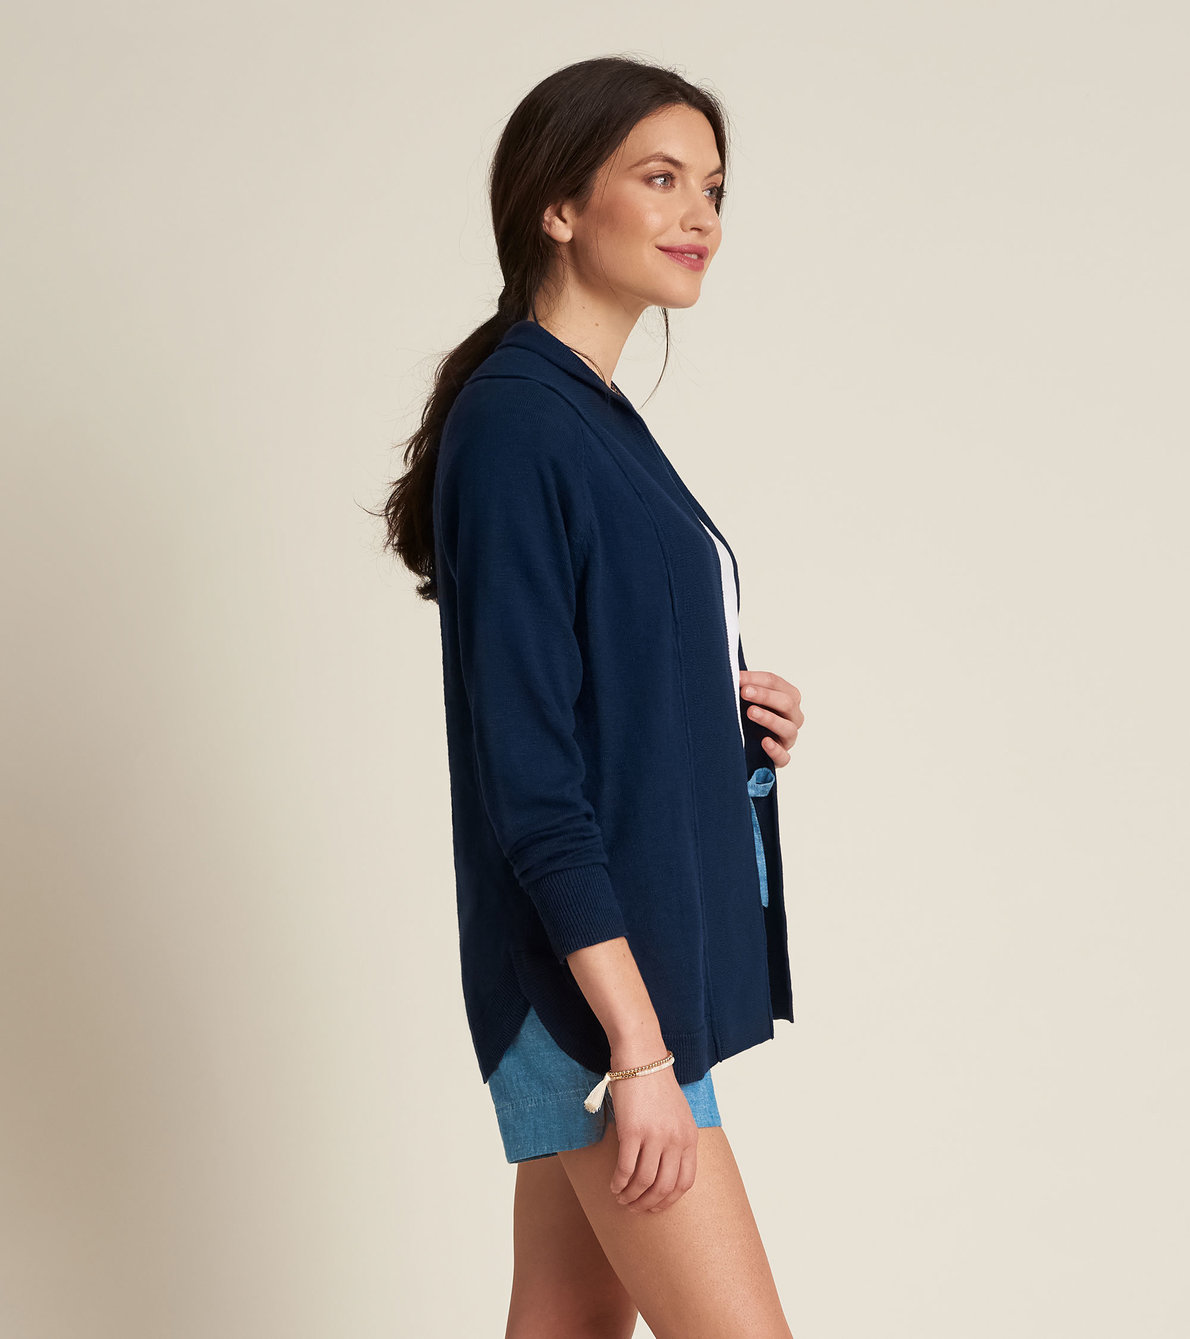 View larger image of Erin Cardigan - Copen Navy